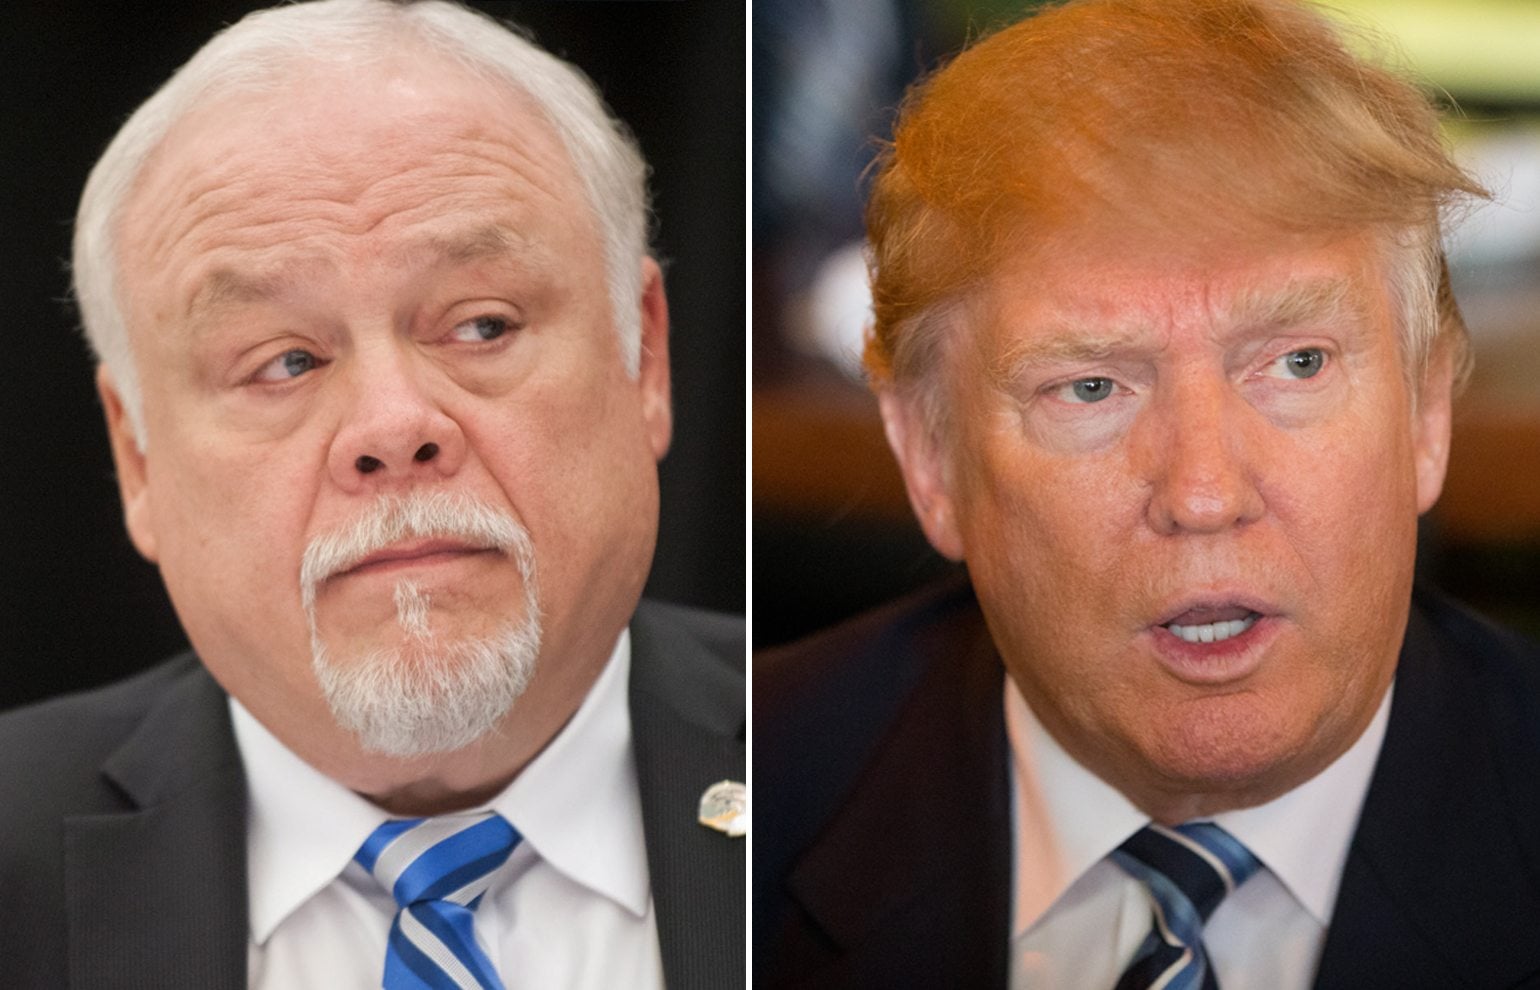 State Sen. Don Benton, R-Vancouver, left, has endorsed Donald Trump from president.